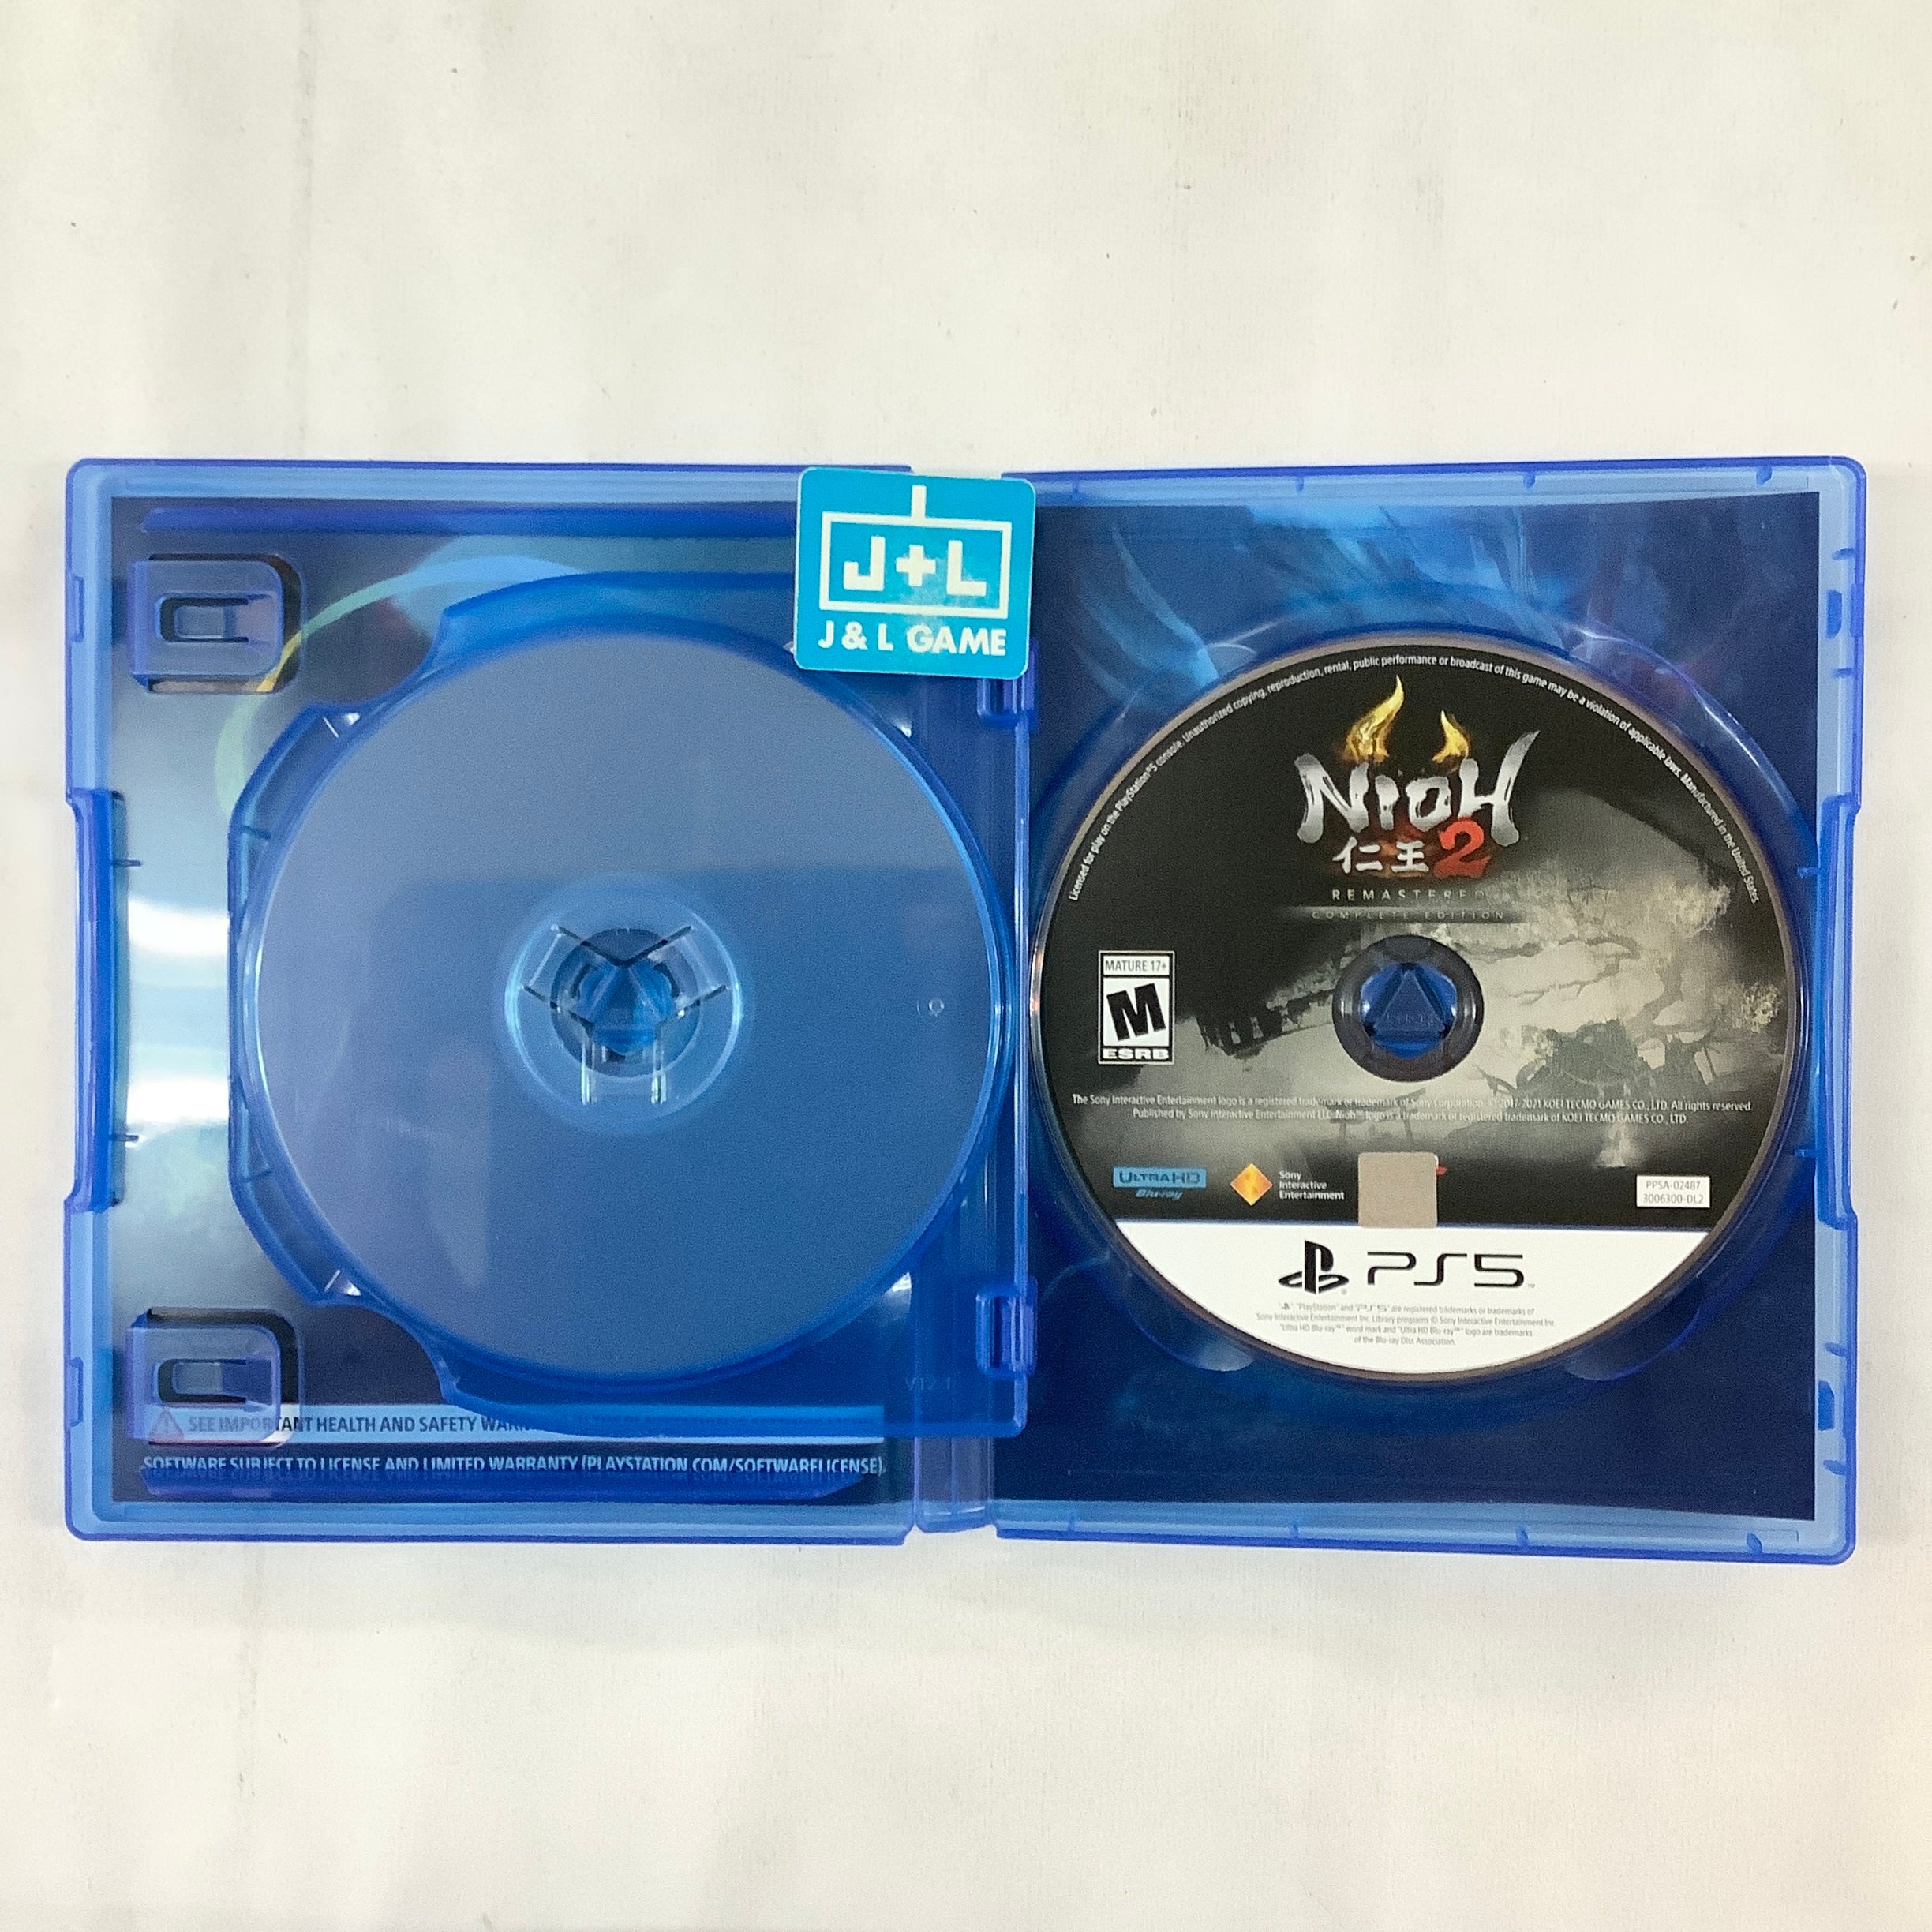 The Nioh Collection - (PS5) PlayStation 5 [Pre-Owned] Video Games Sony Interactive Entertainment   